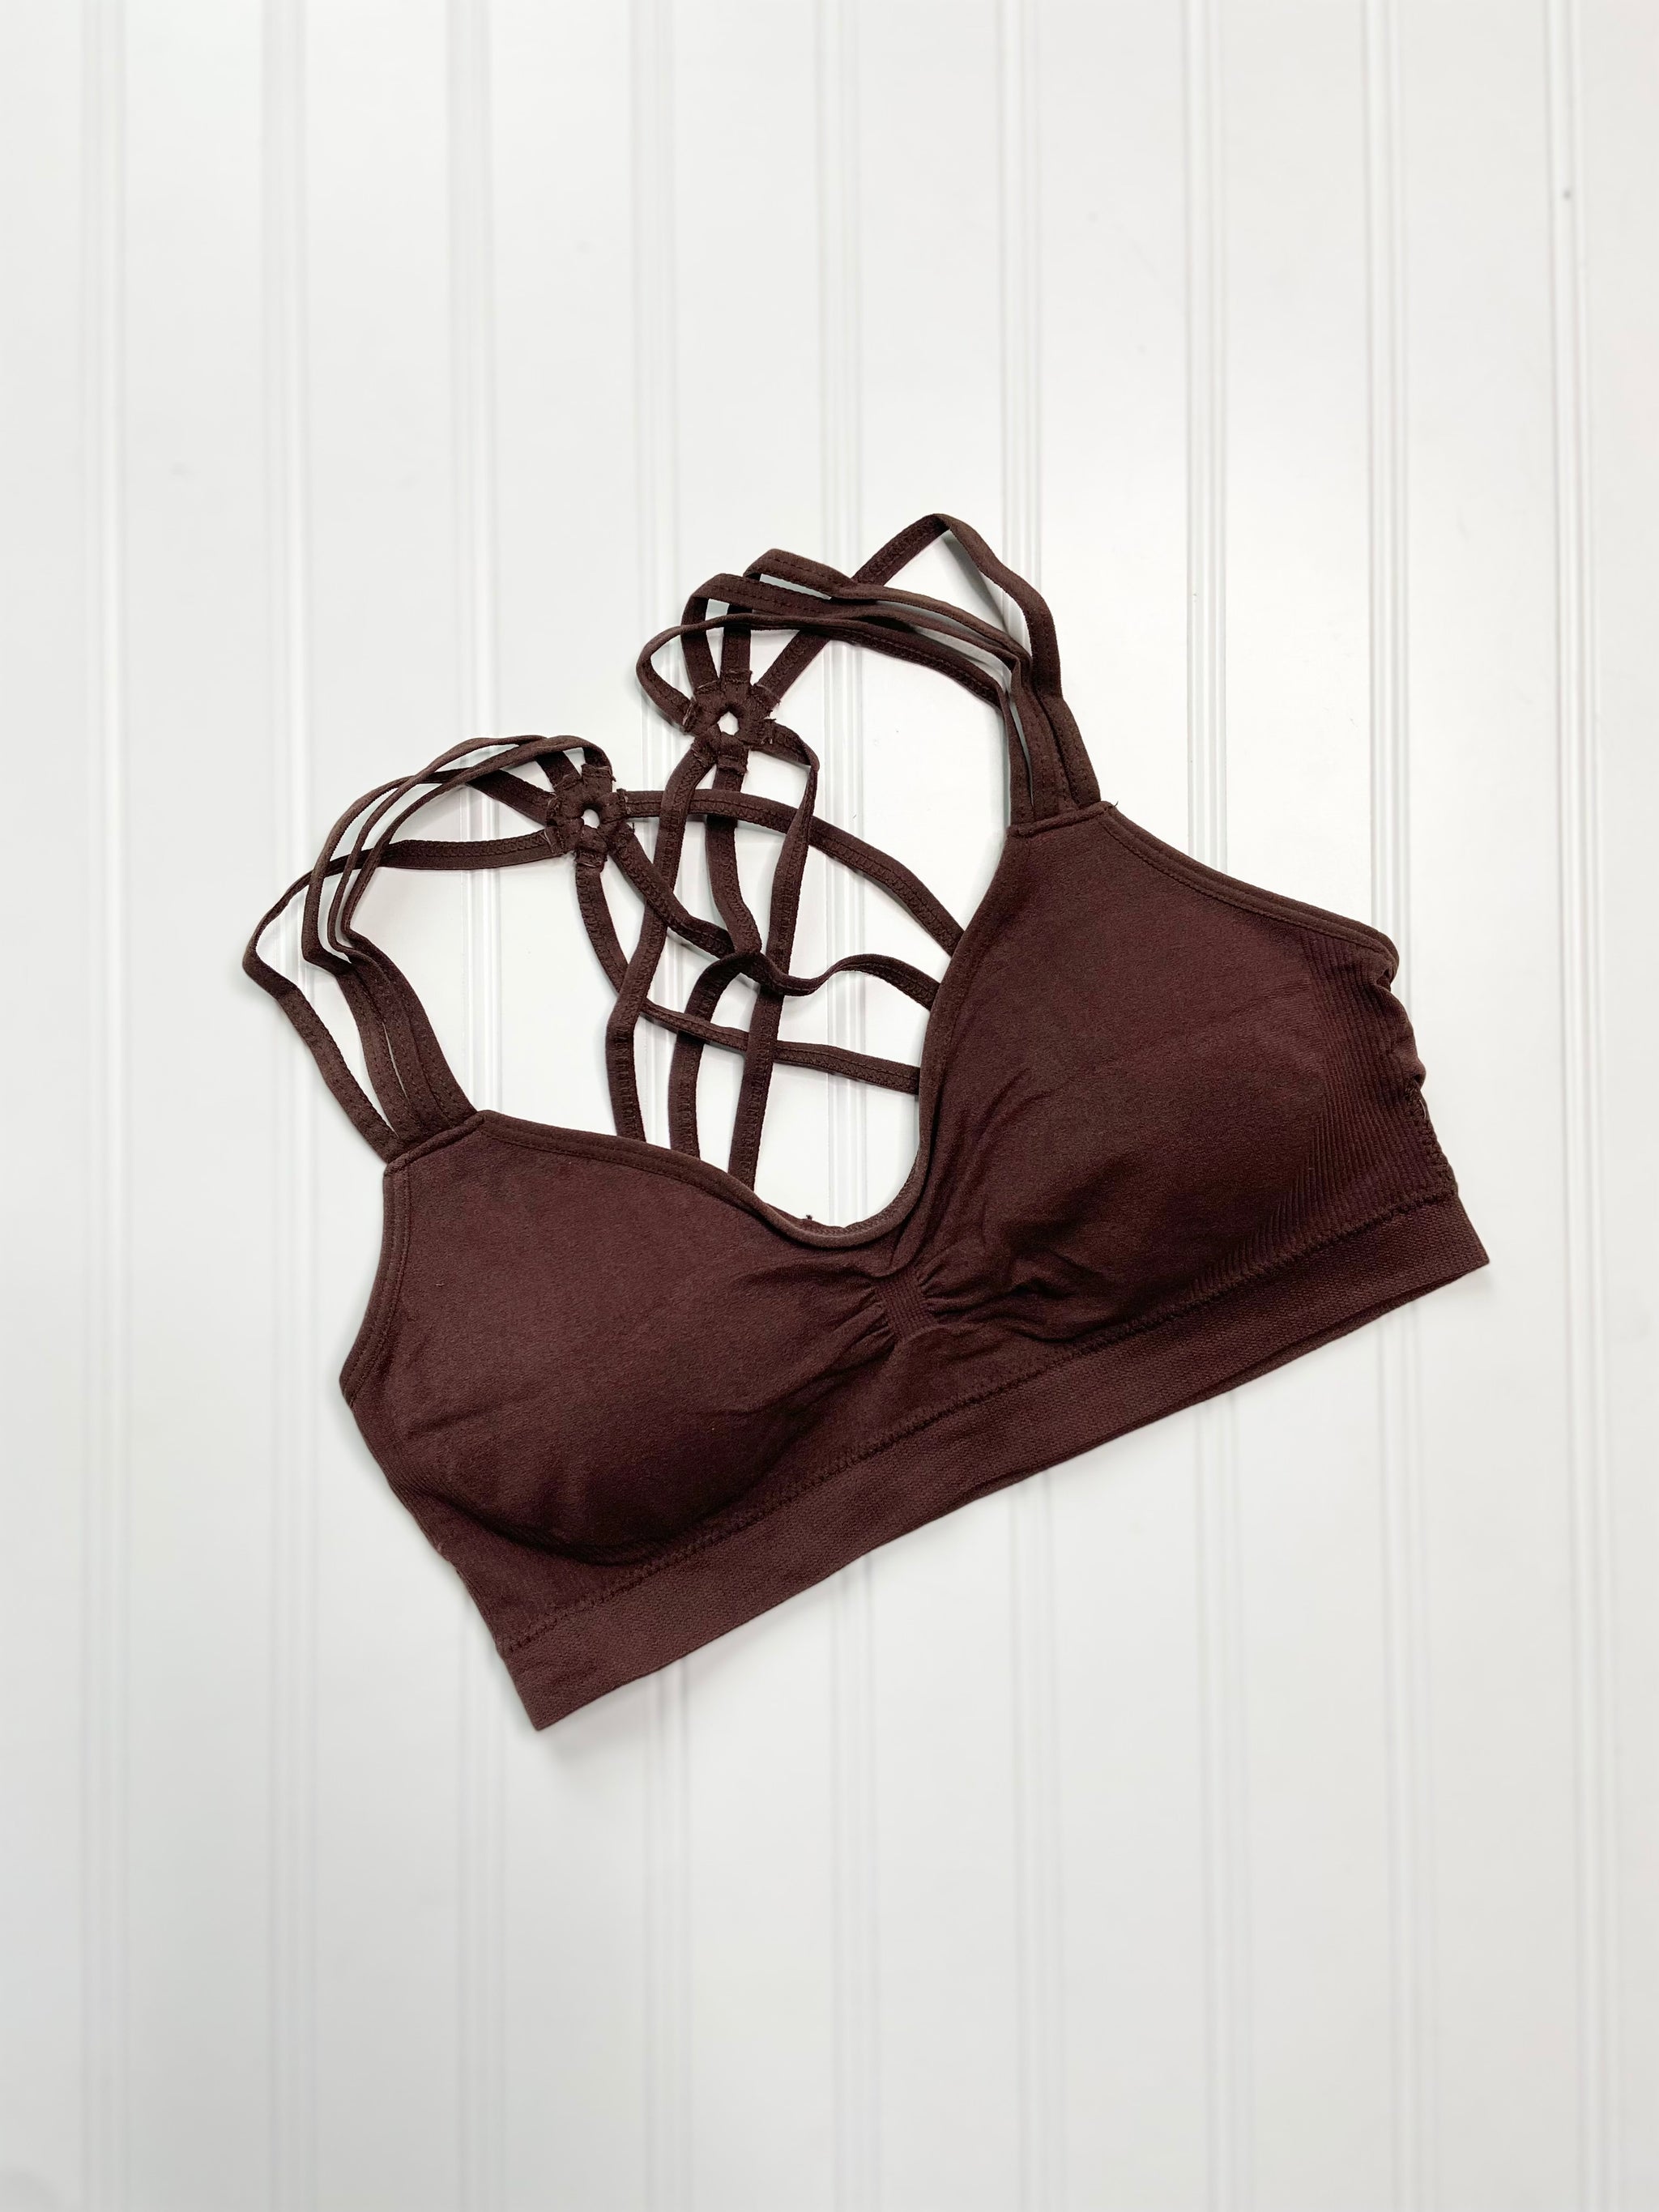 Chocolate Brown Strappy Bralette - The Peach Mimosa